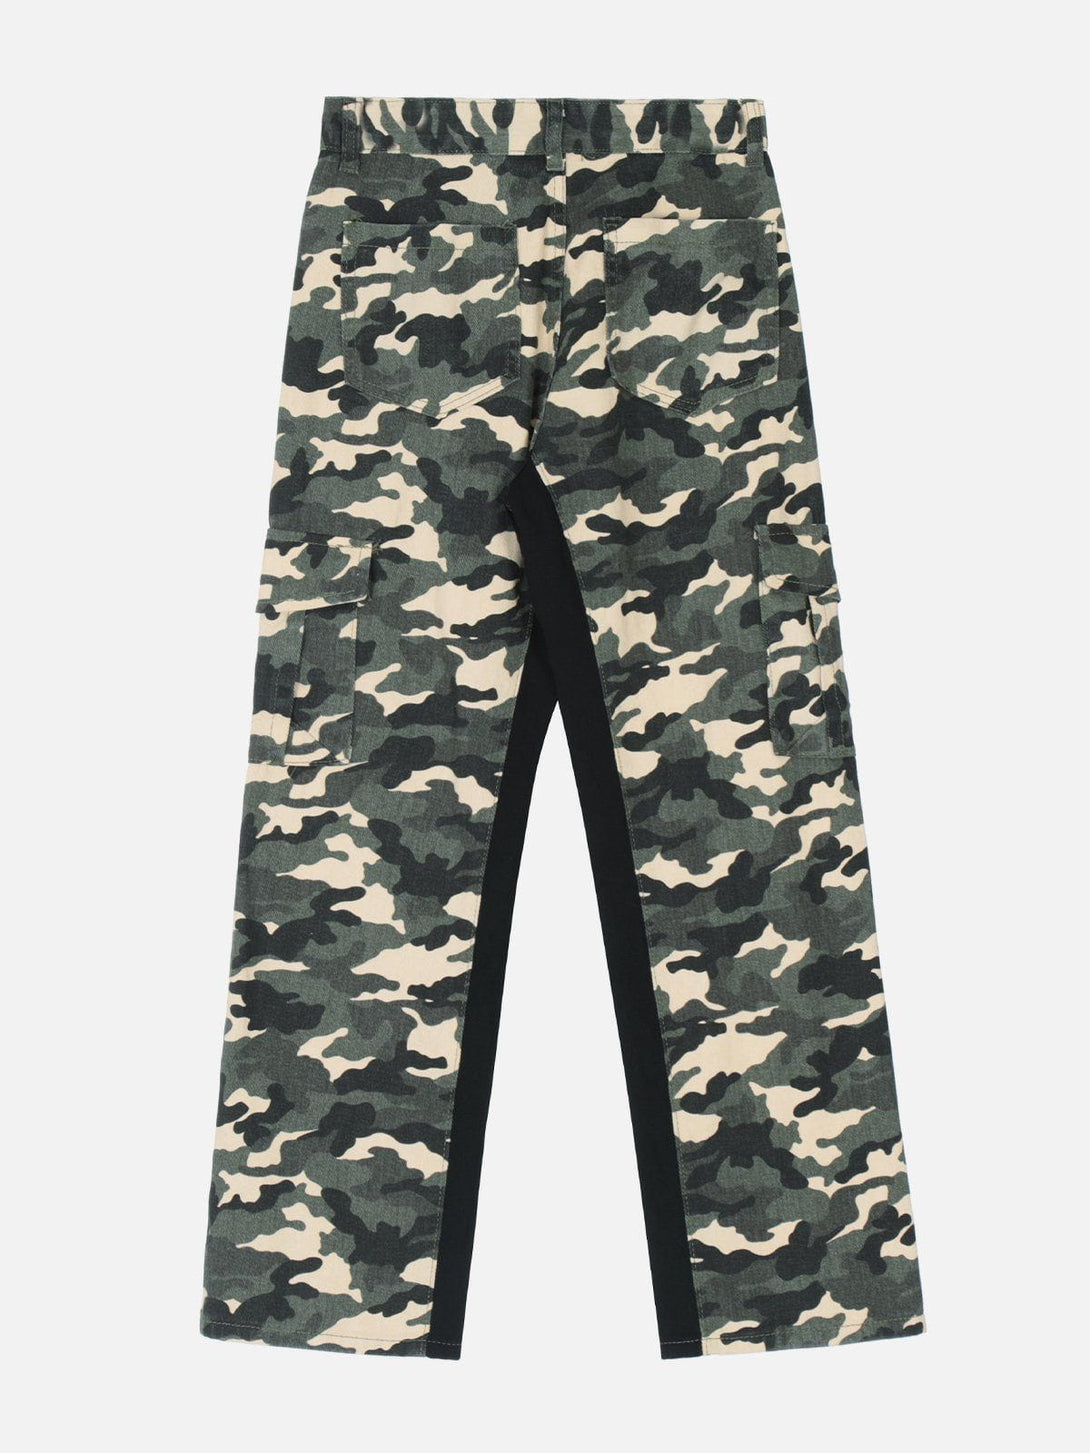 Levefly - Splicing Camouflage Print Pants - Streetwear Fashion - levefly.com